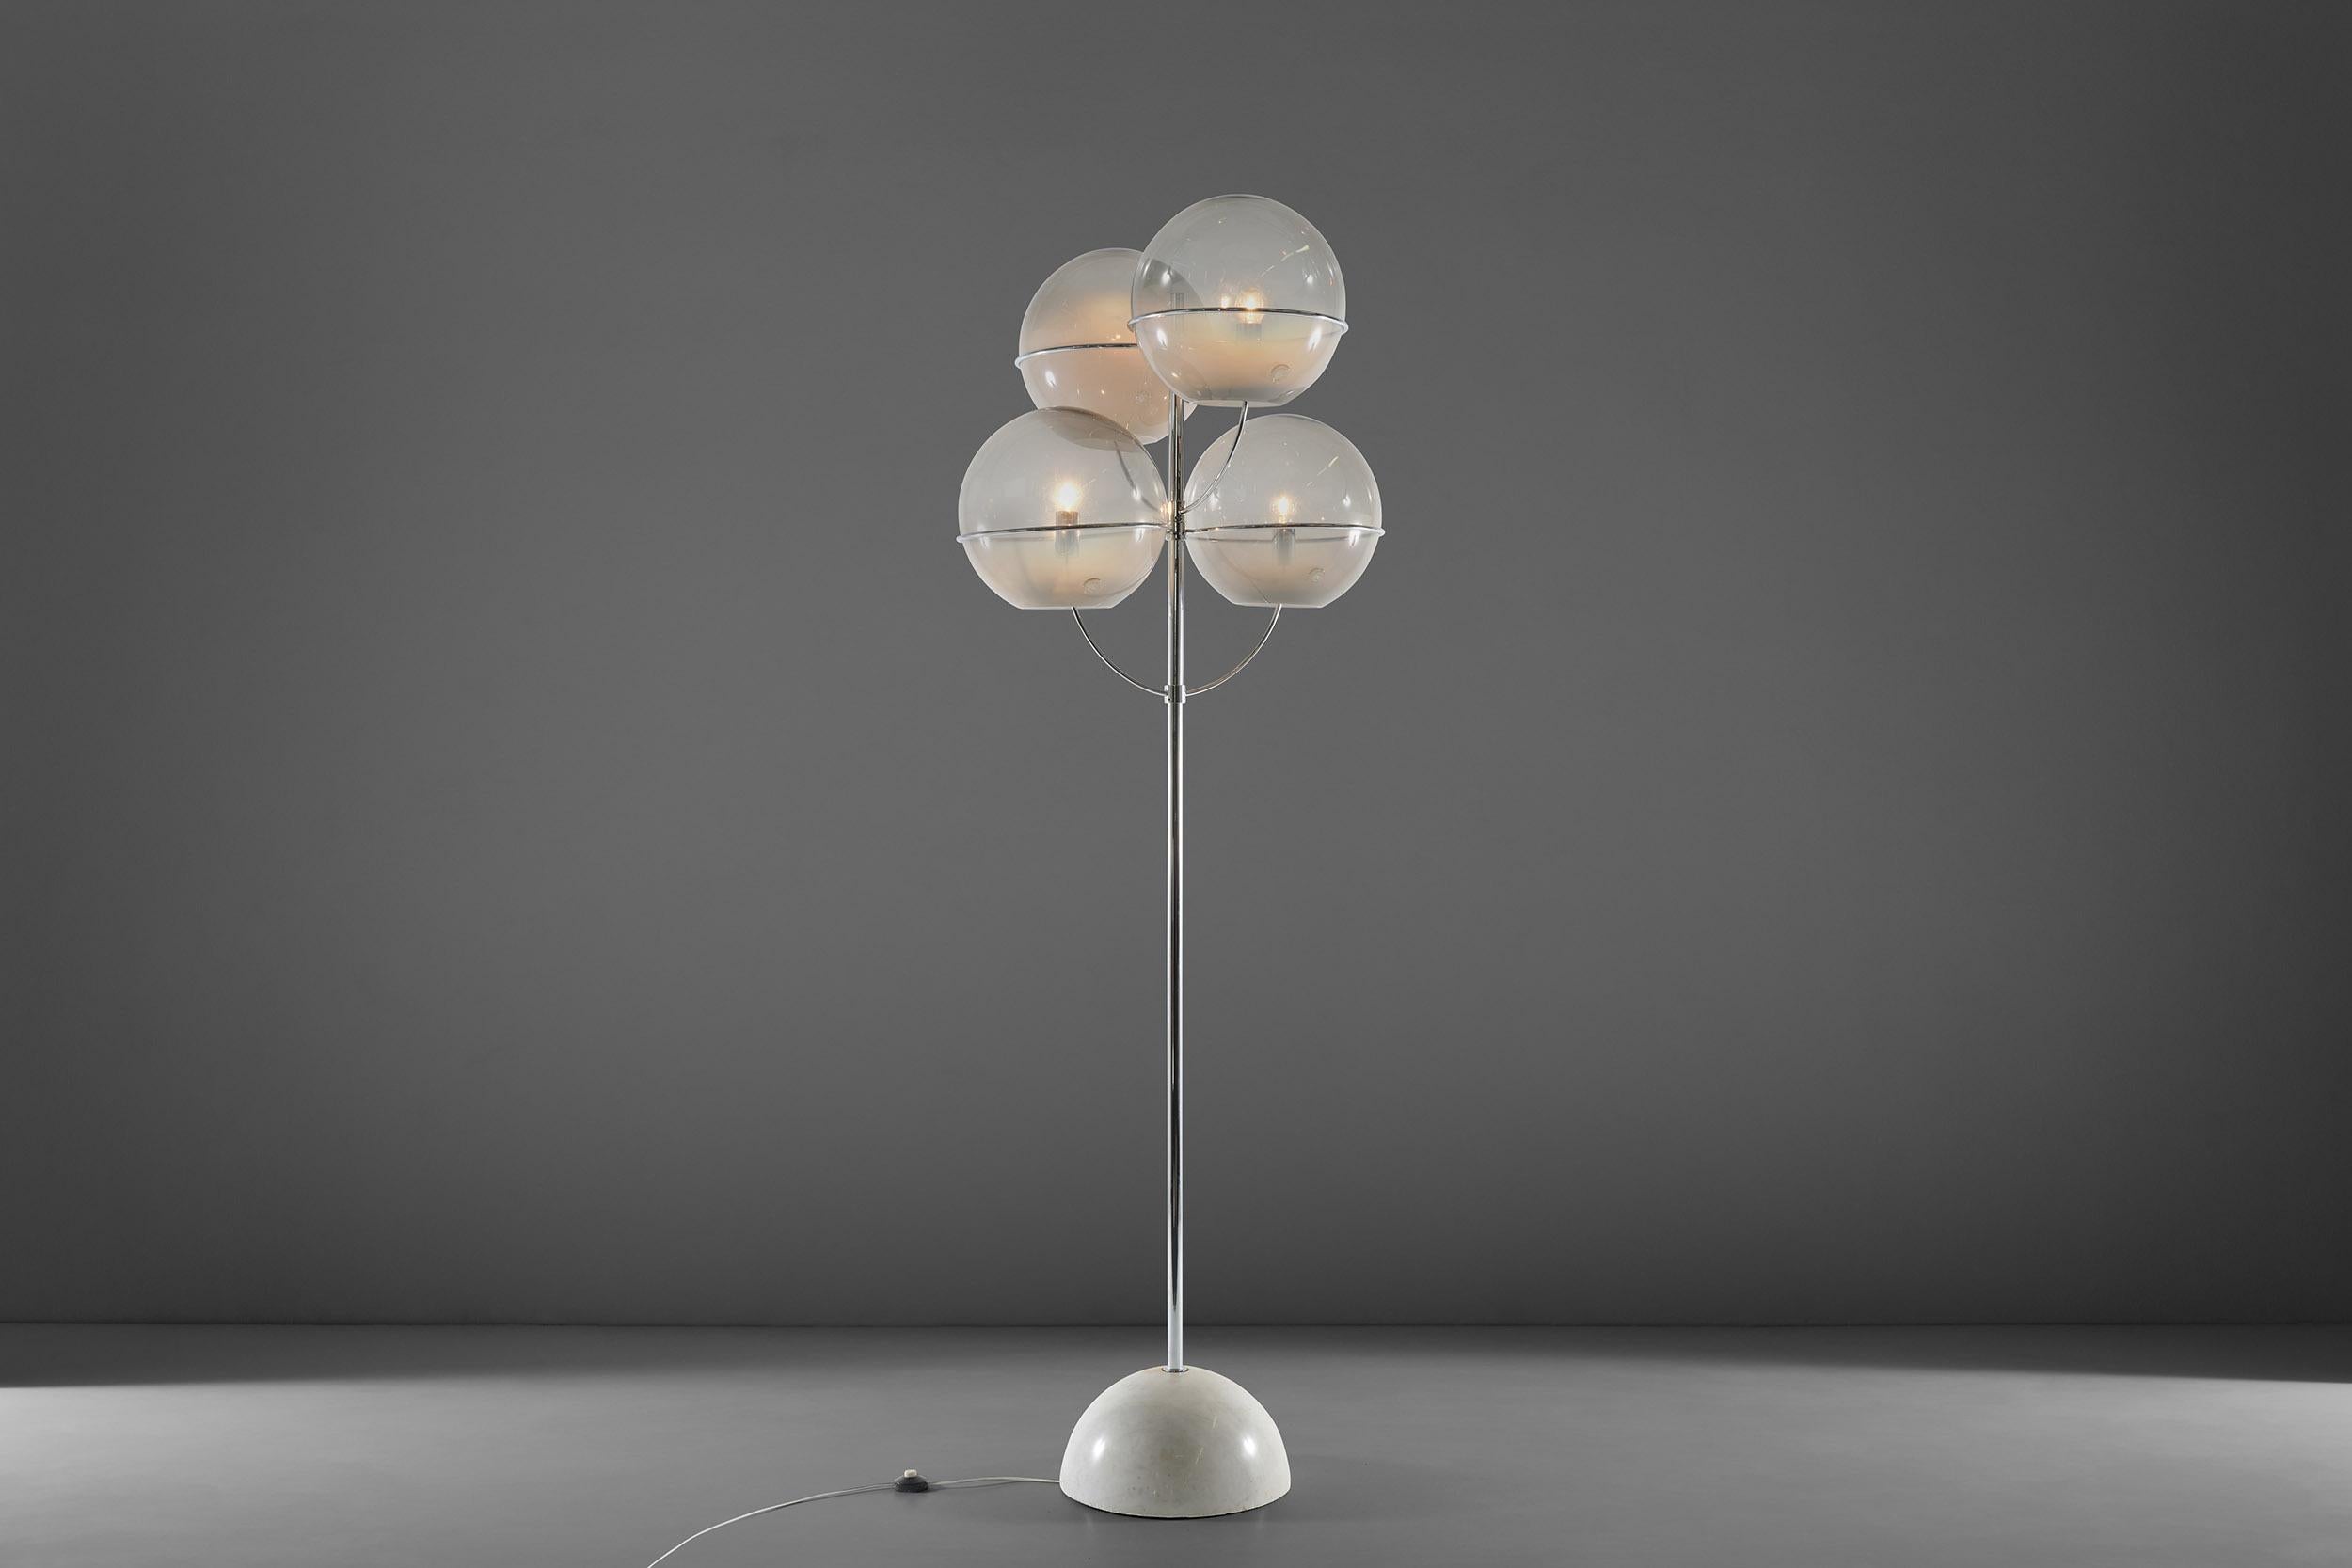 This rare Lyndon floor lamp was designed by Vico Magistretti in 1968 for Knoll International. With a Zinc-plated metal structure and marble base, this floor lamp features 4 glasses, each shade with applied glass seal inscribed 